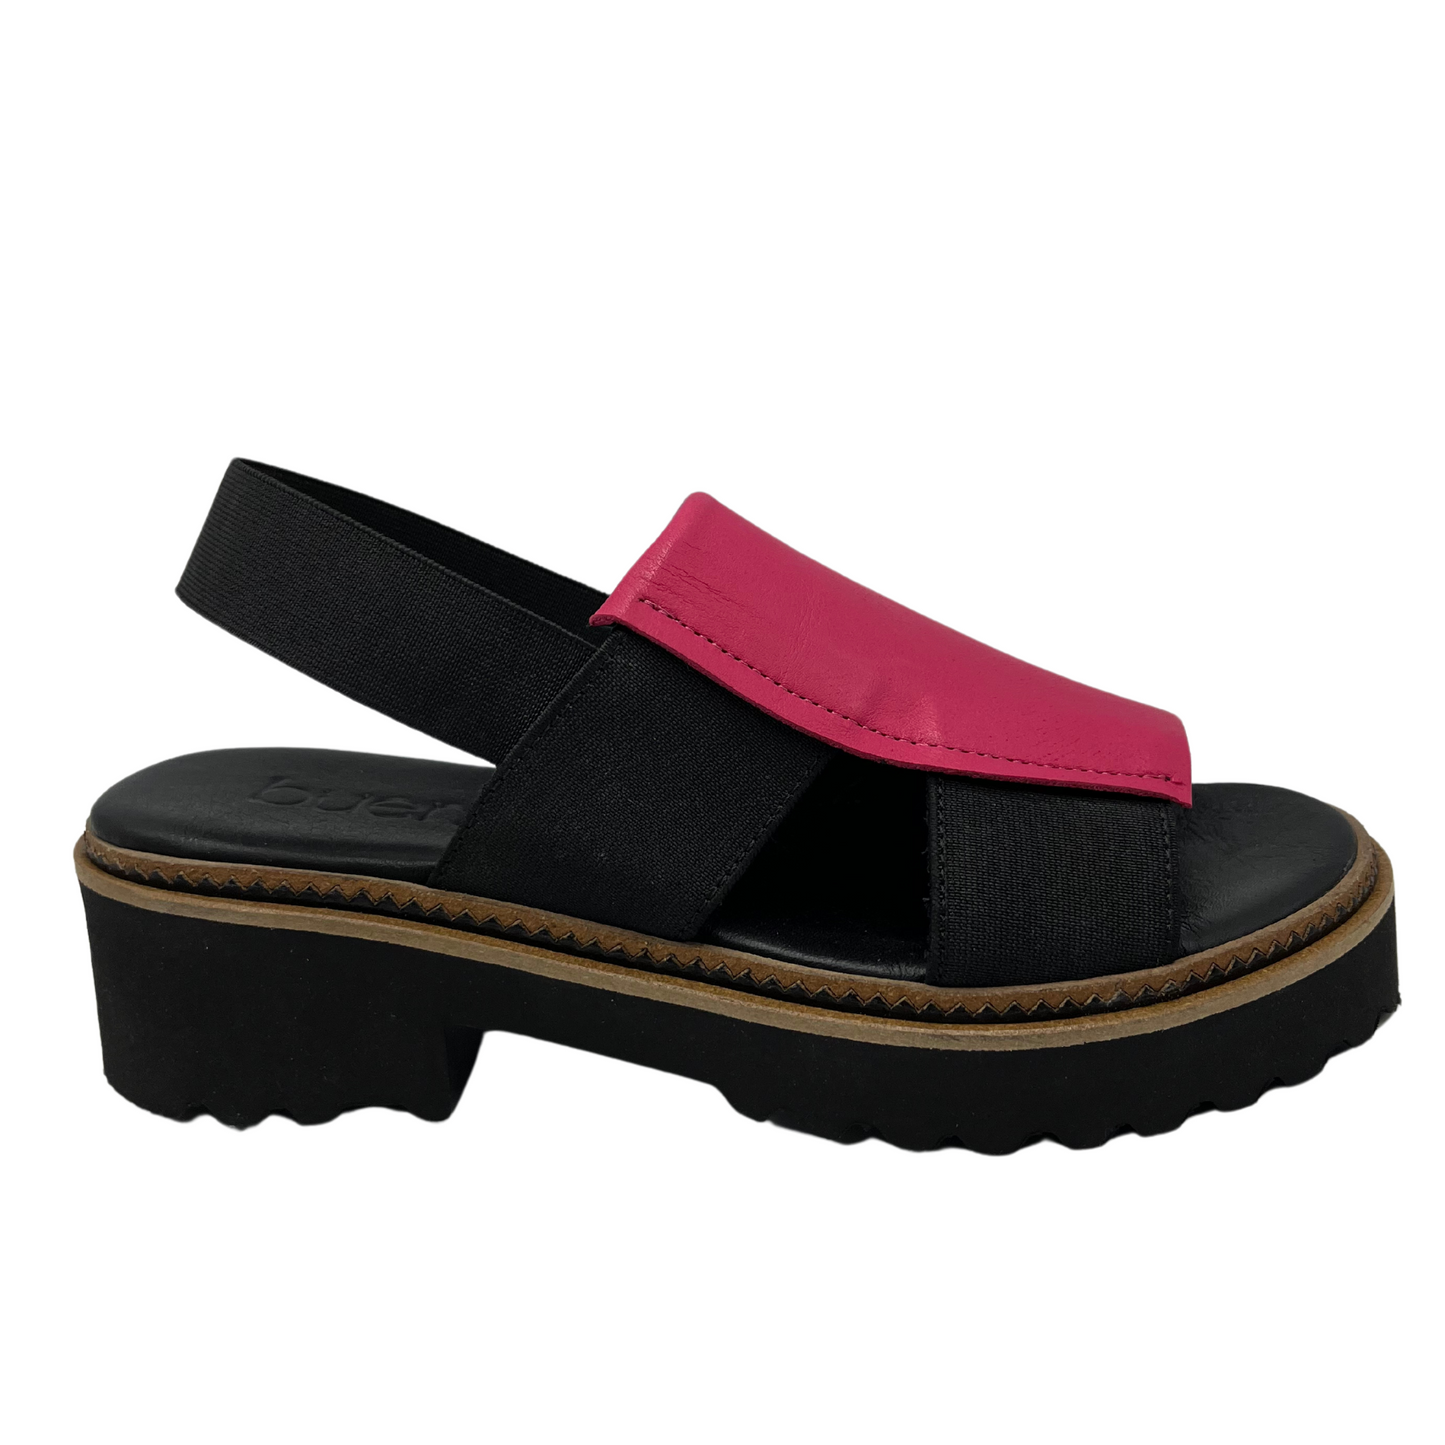 Right facing view of hot pink sandal with chunky sole and black elastic straps